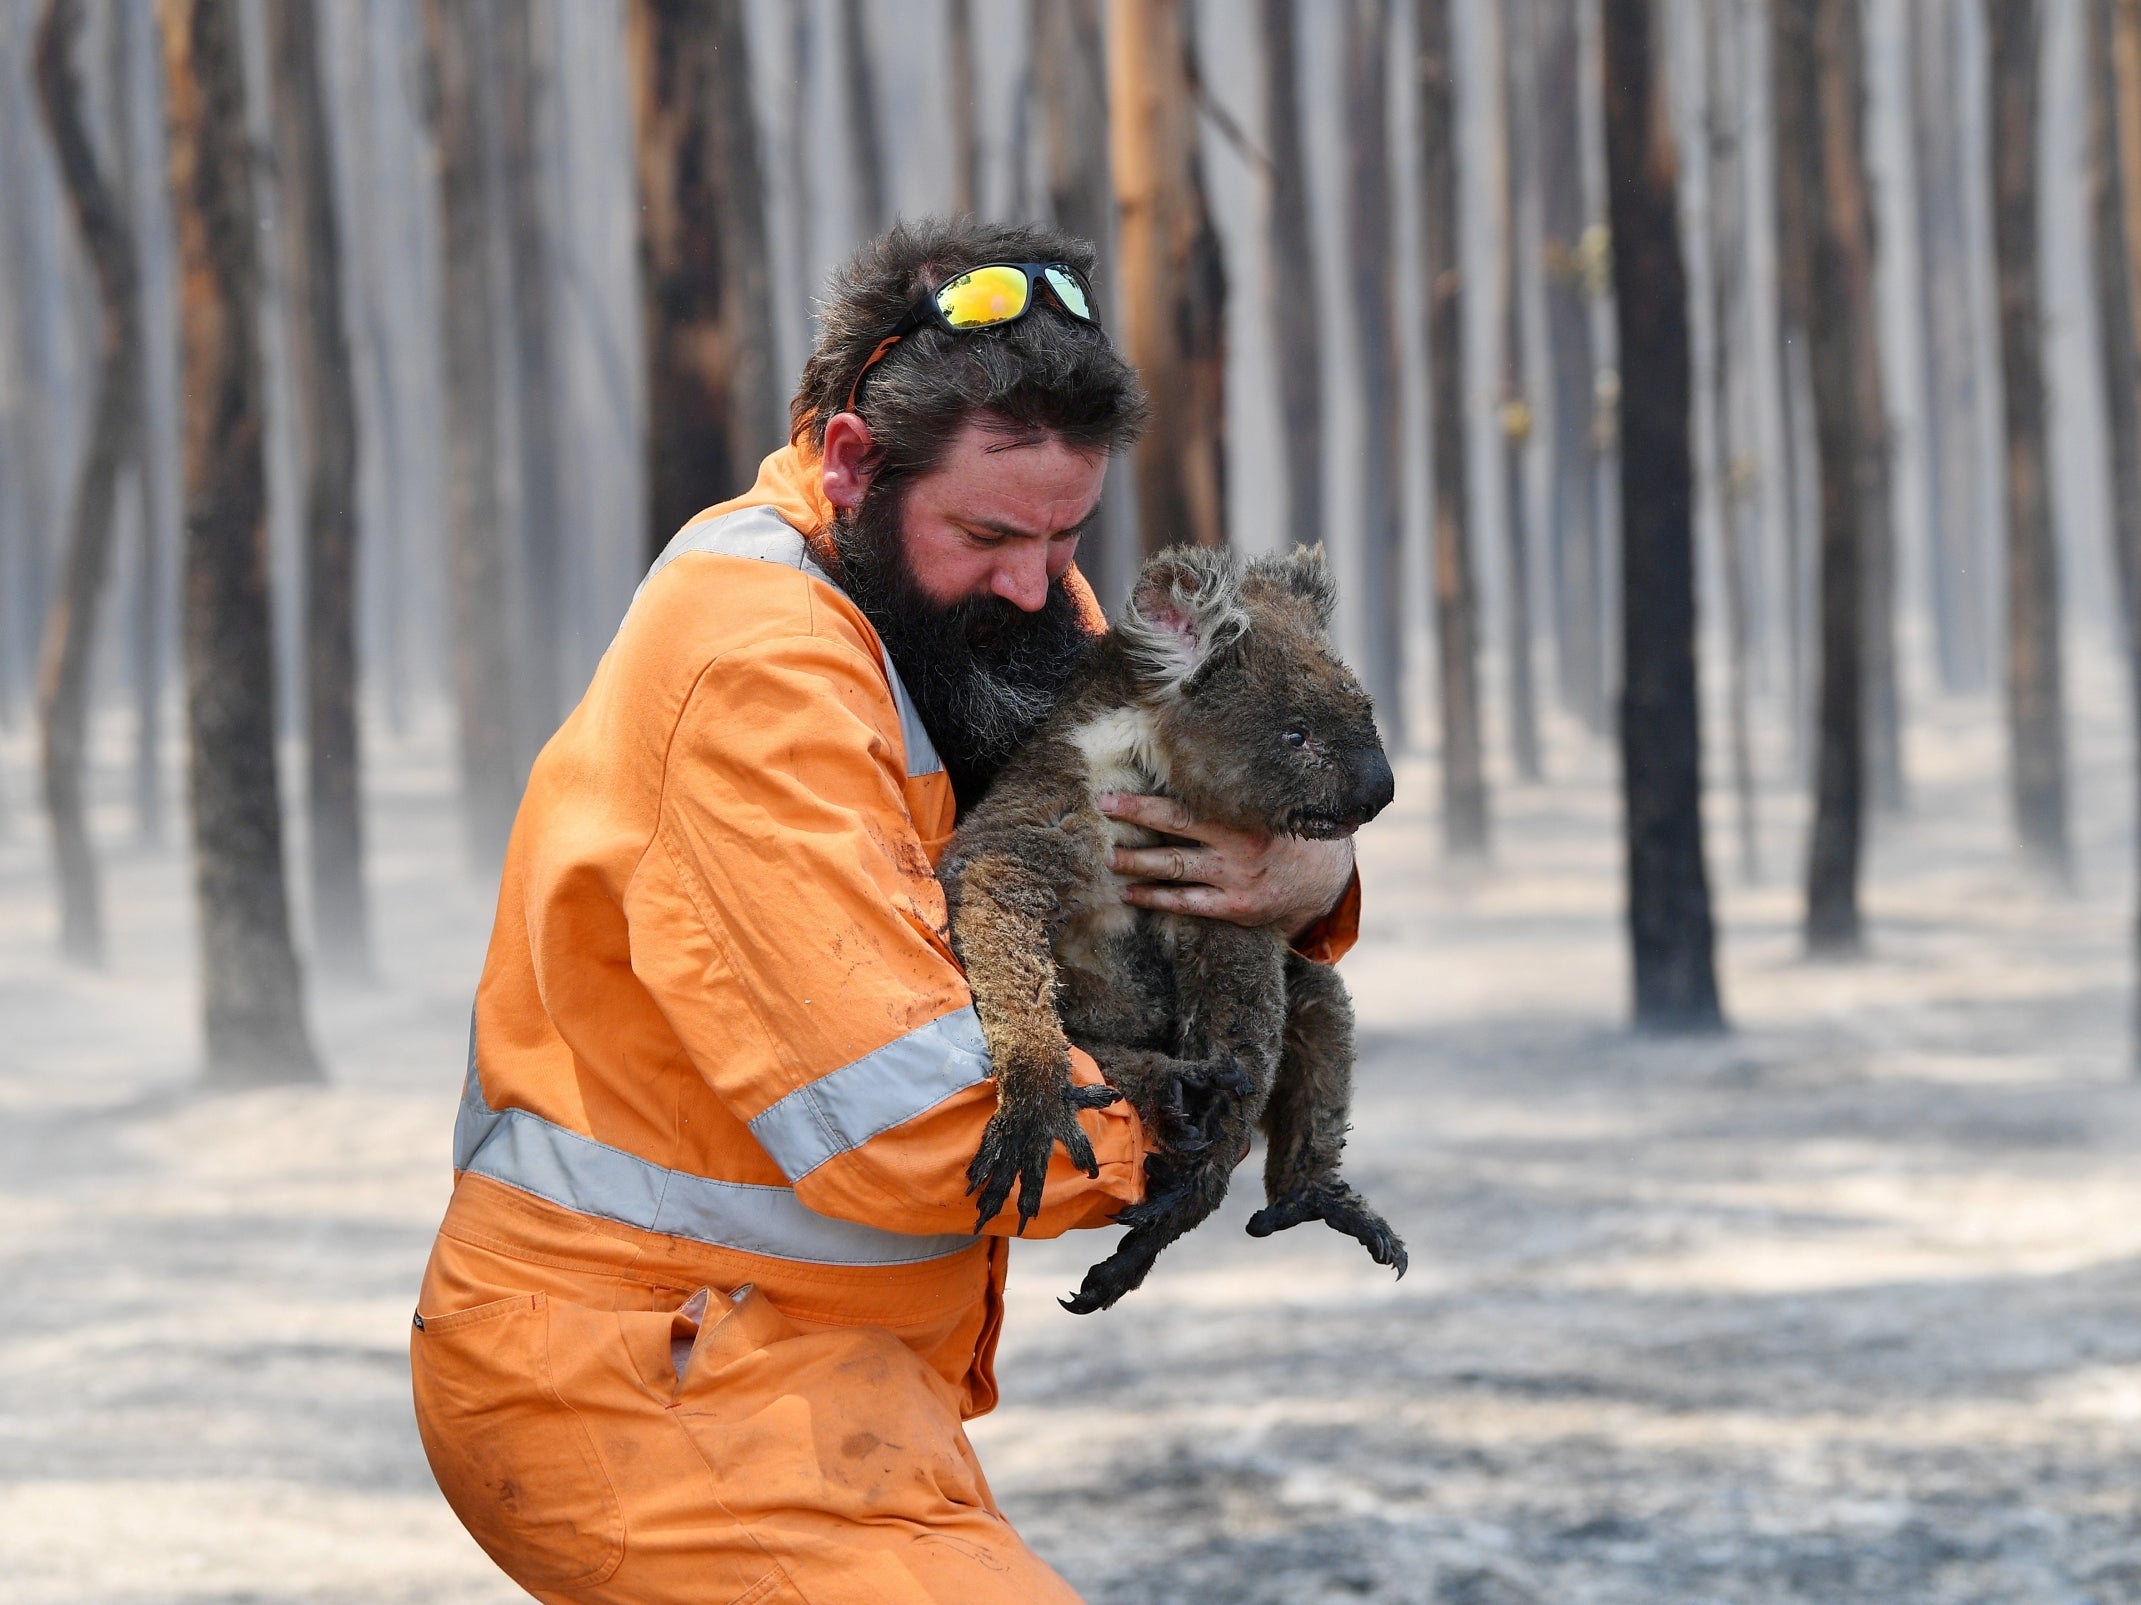 A rescuer holds a koala in a burning forest in January 2020